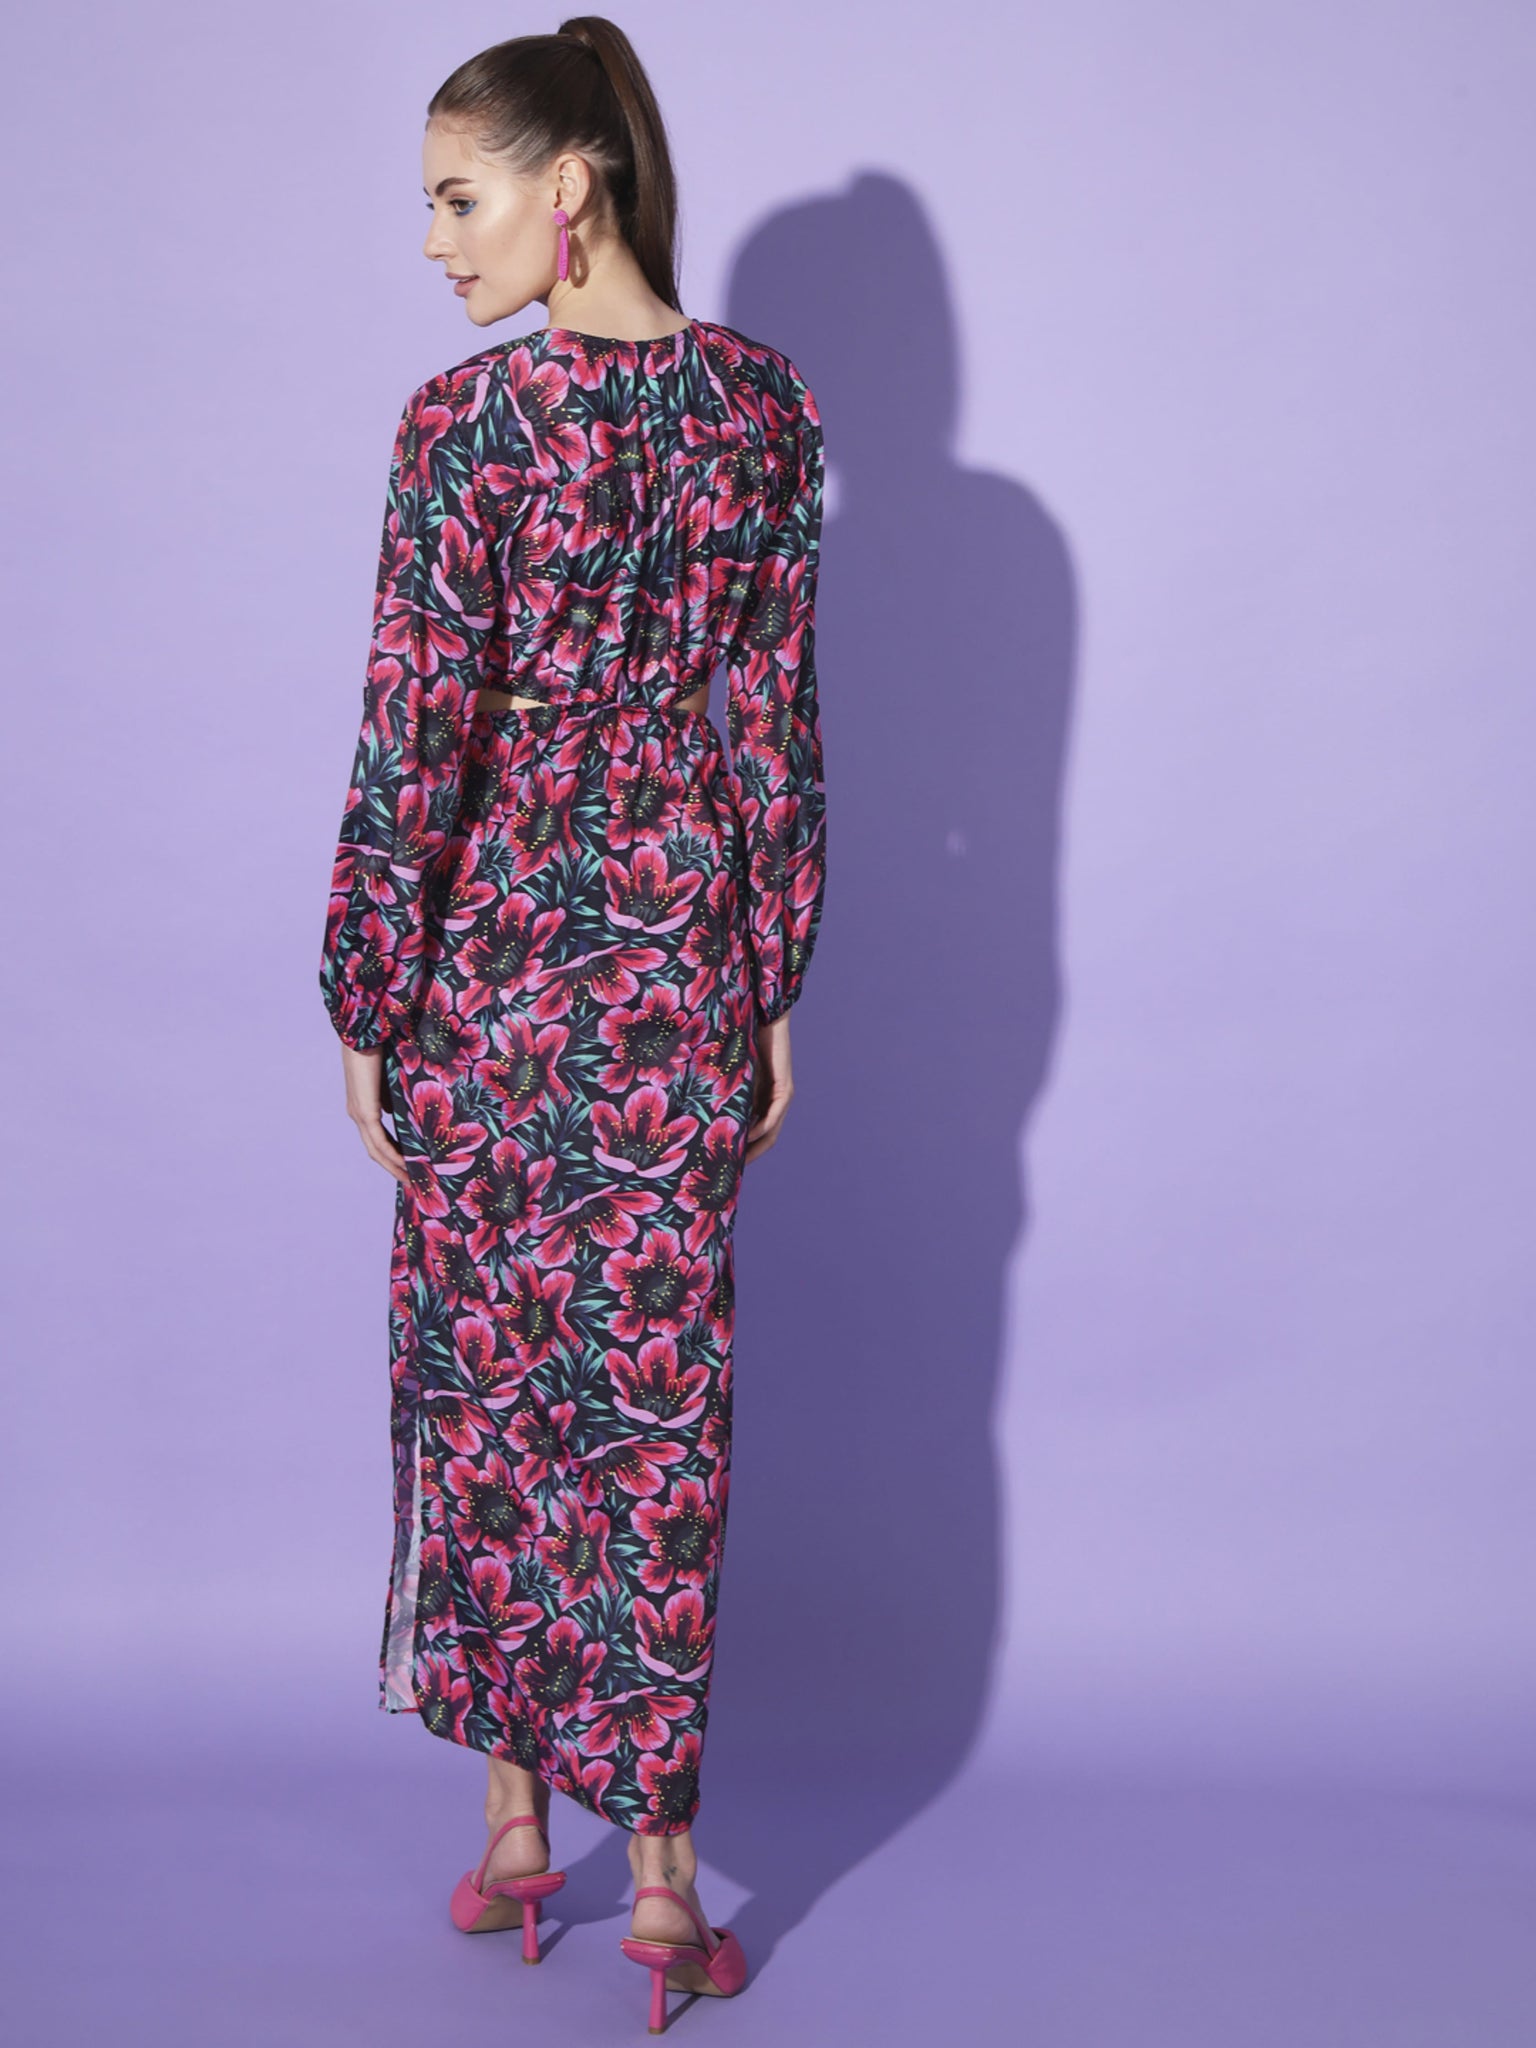 Blossom in Darkness: Multicolour Floral Dress